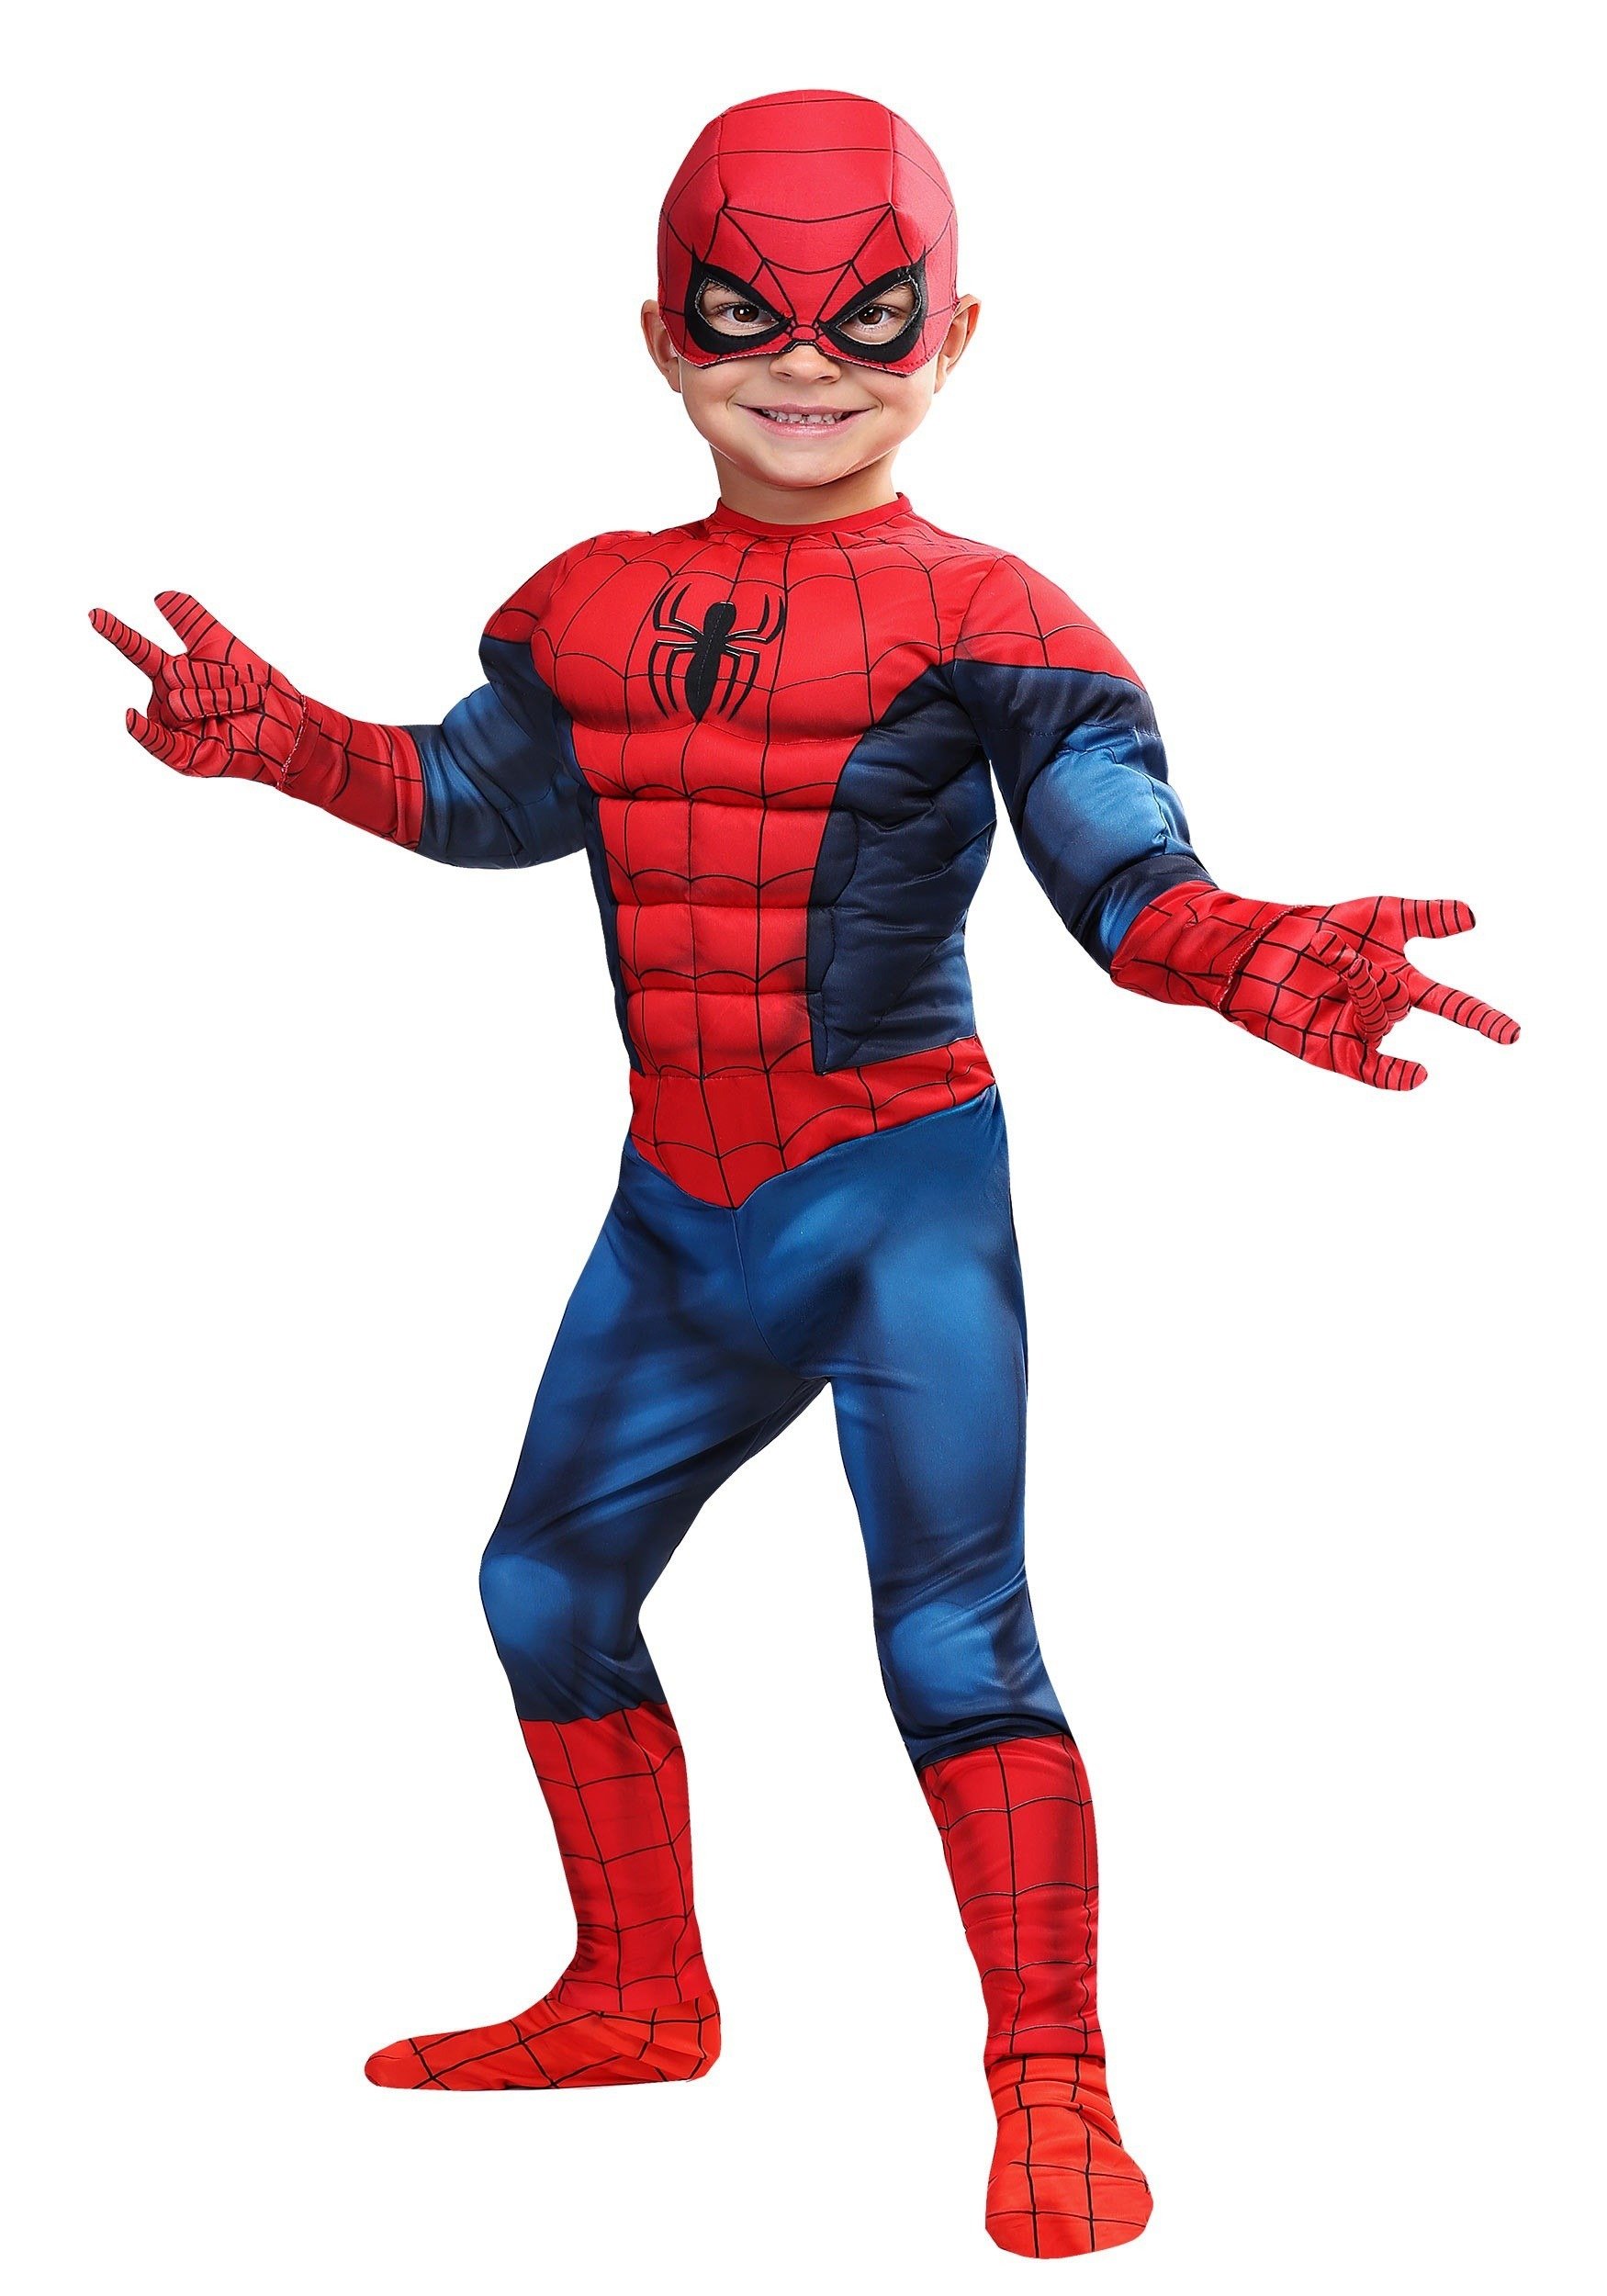 7 Spiderman Costumes for your Kids